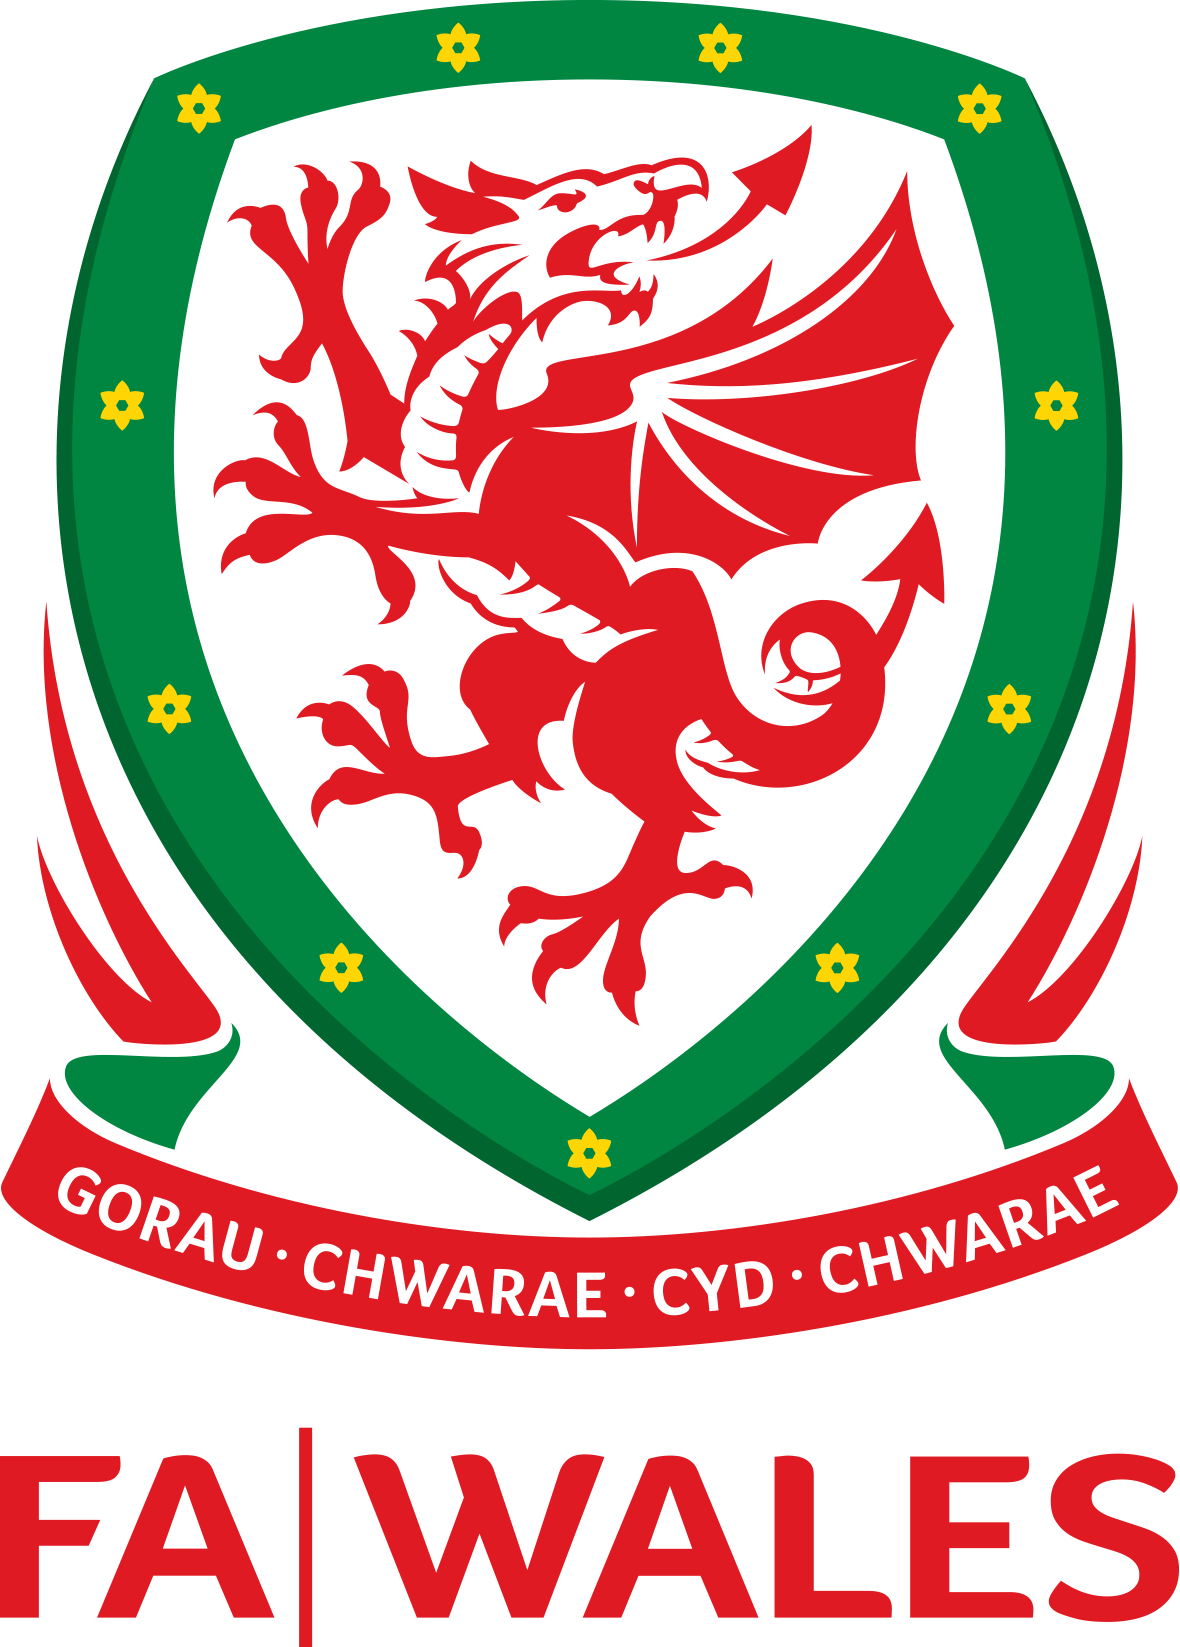 Image - Football Association of Wales logo (introduced 2011, with